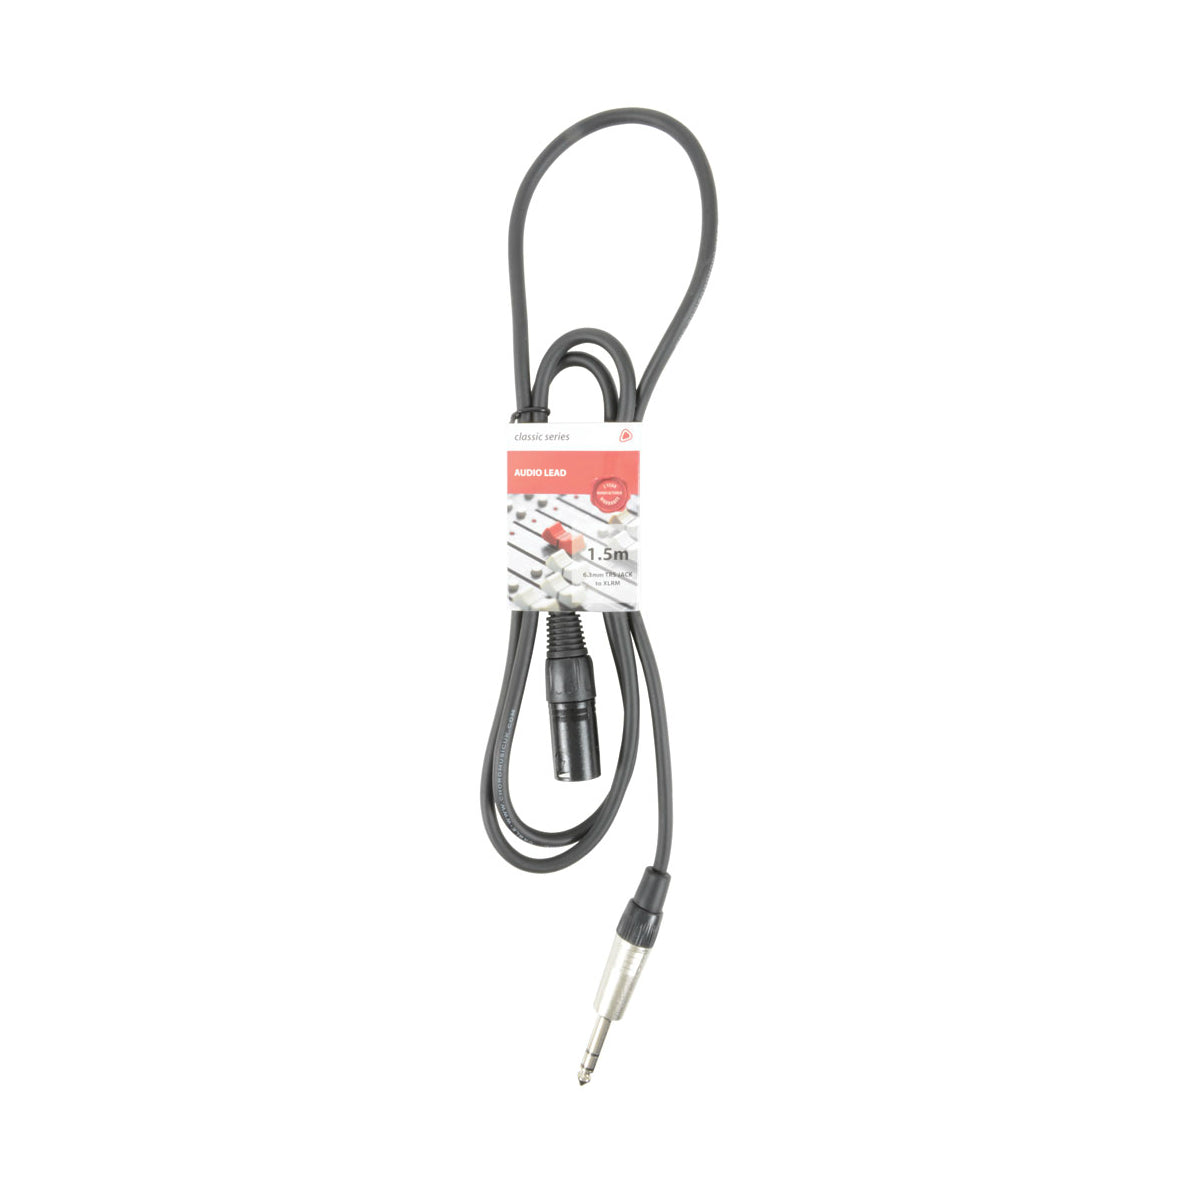 Chord XLR Male to 6.3mm Balanced Jack Cable - 12m (190.051UK)